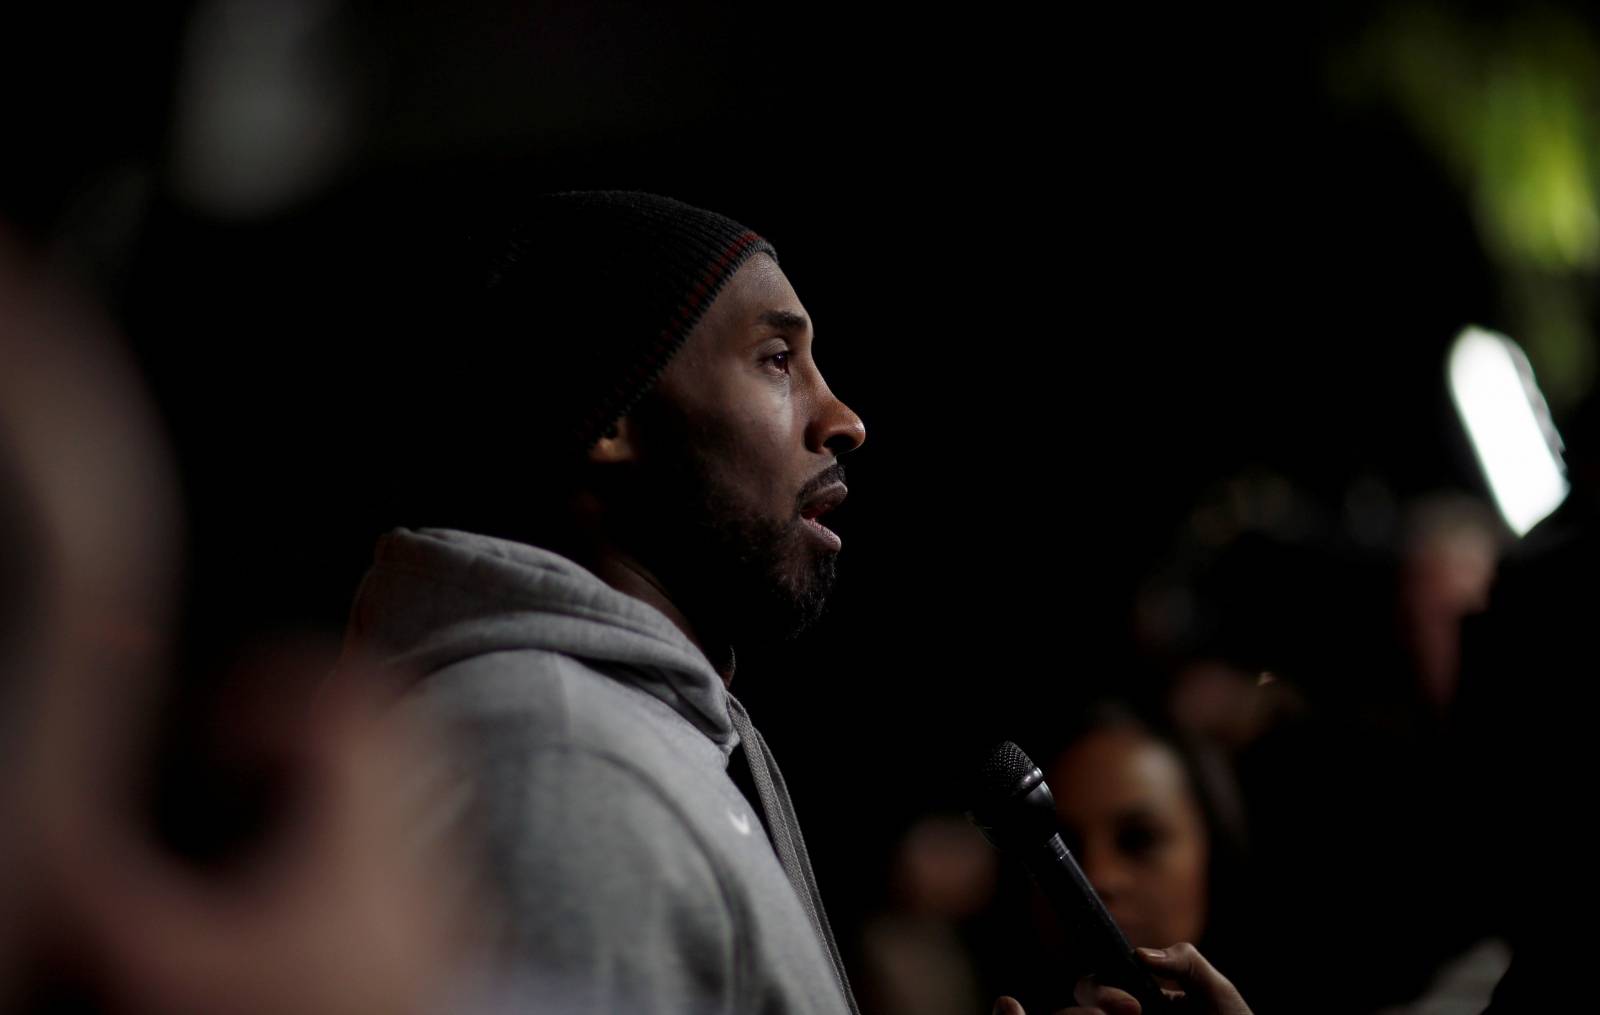 Former NBA player Bryant attends a community screening for the film "Just Mercy" in Los Angeles